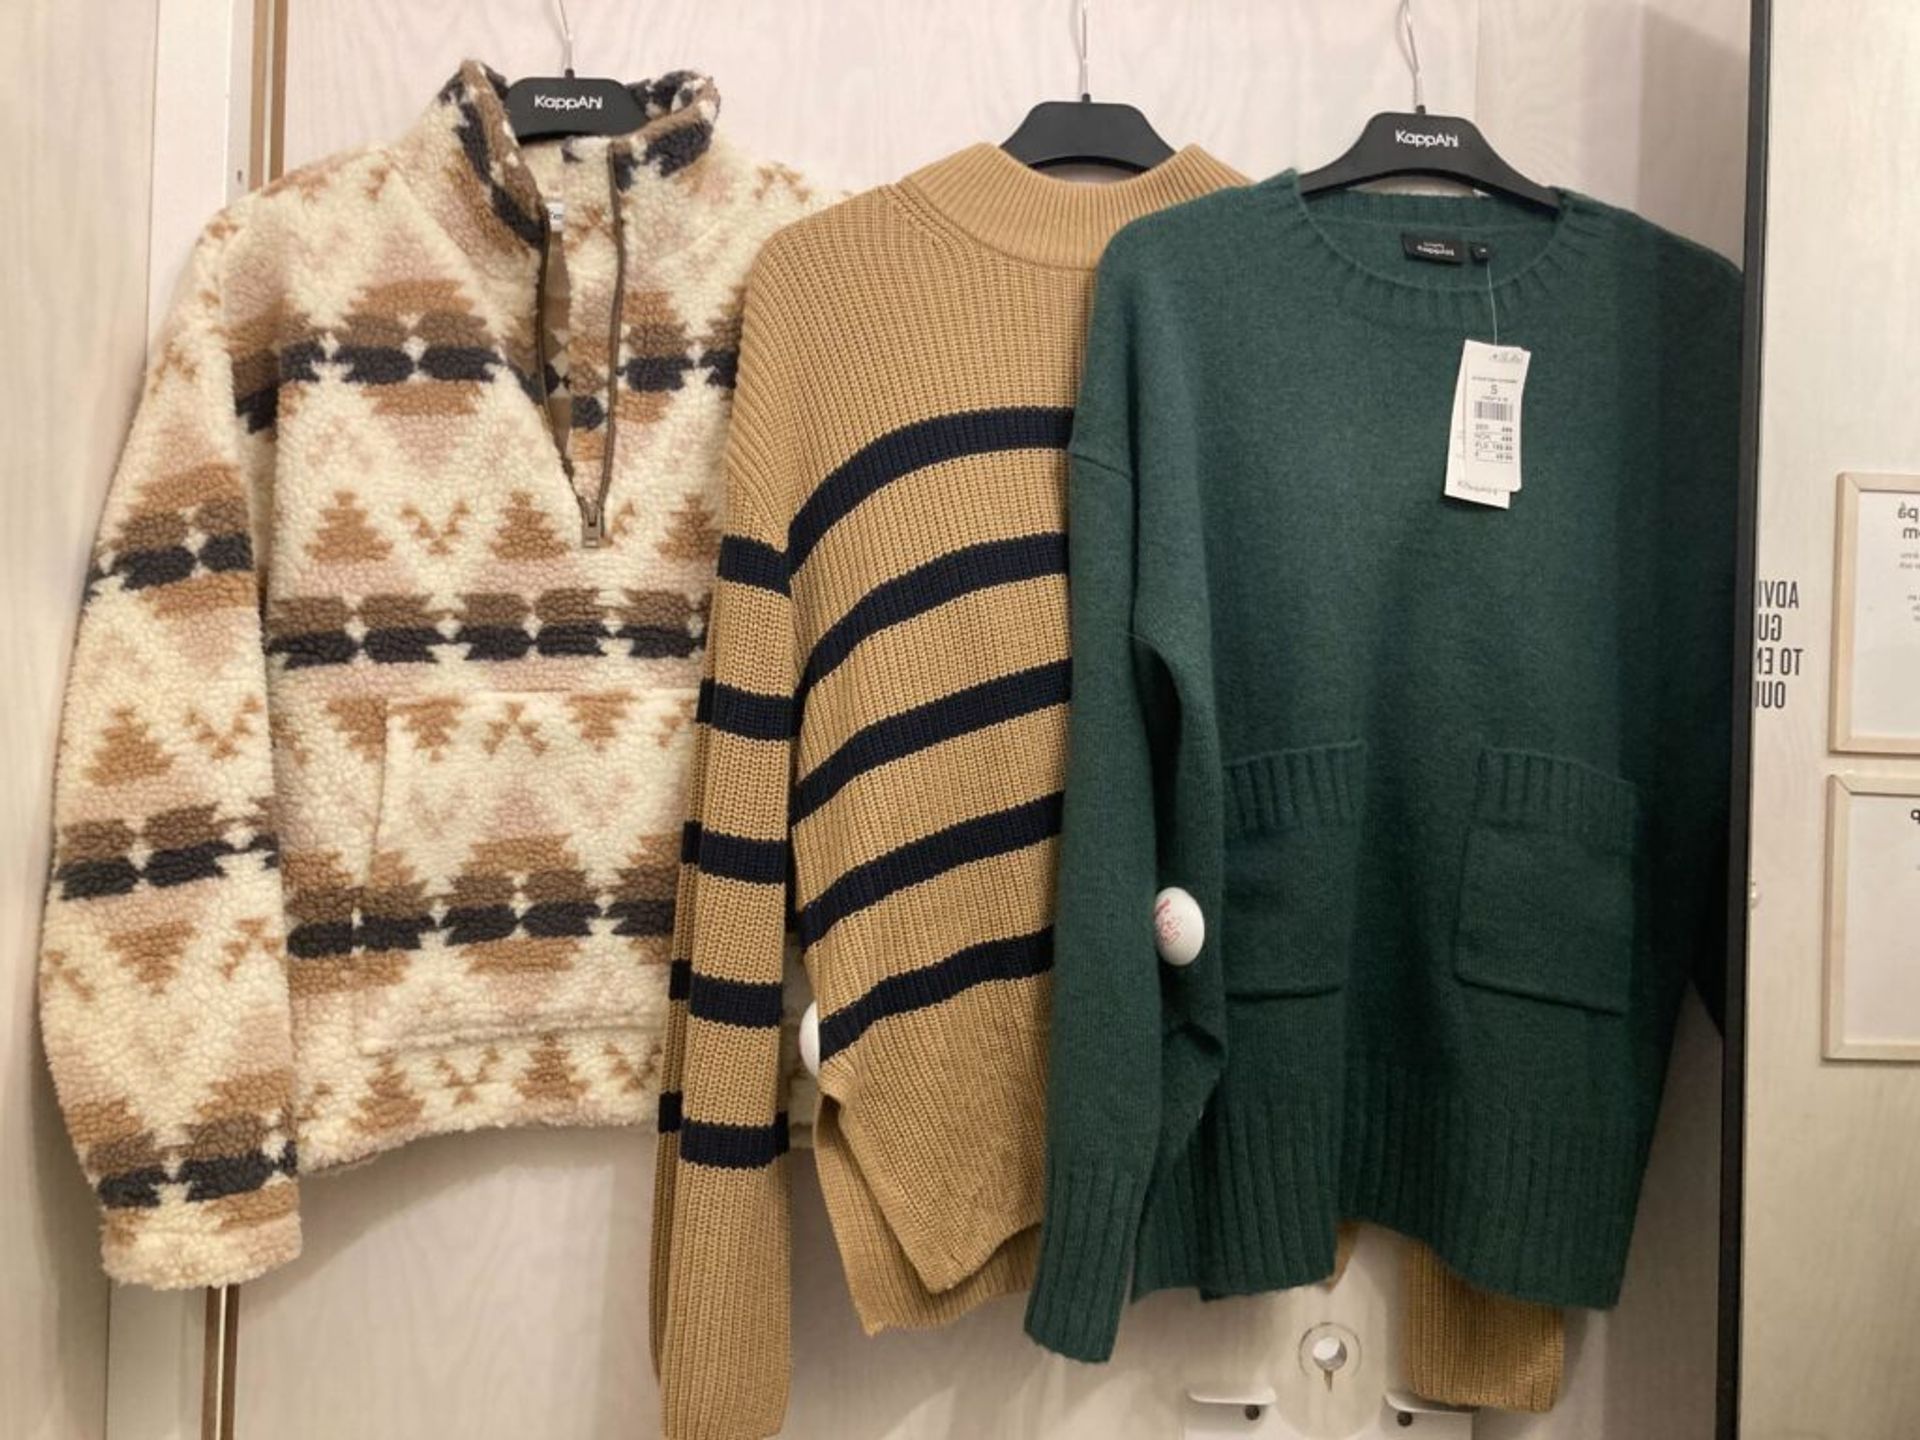 Three different sweaters.